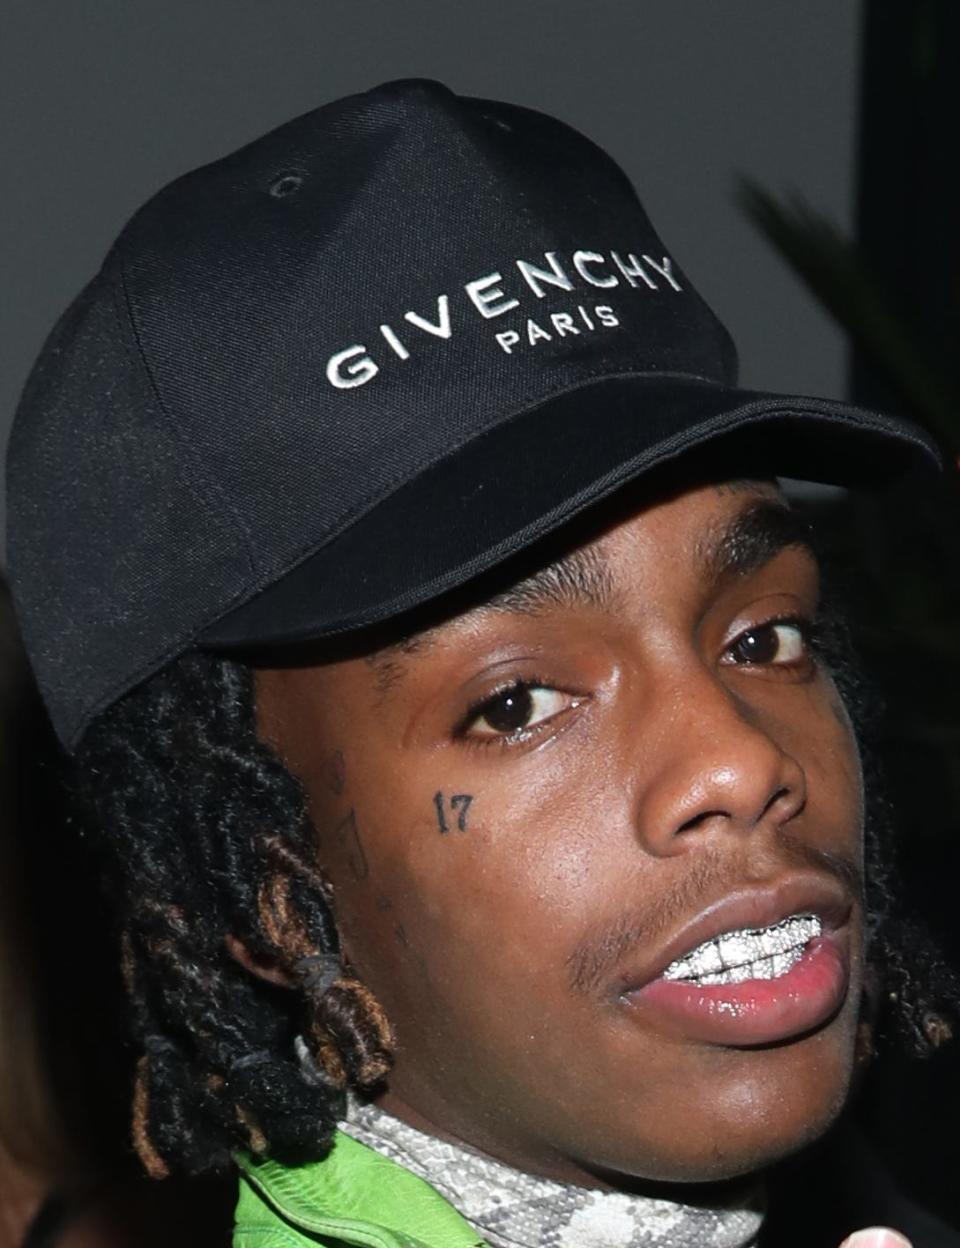 Rapper YNW Melly's case involving two counts of first degree murder ended in a mistrial.